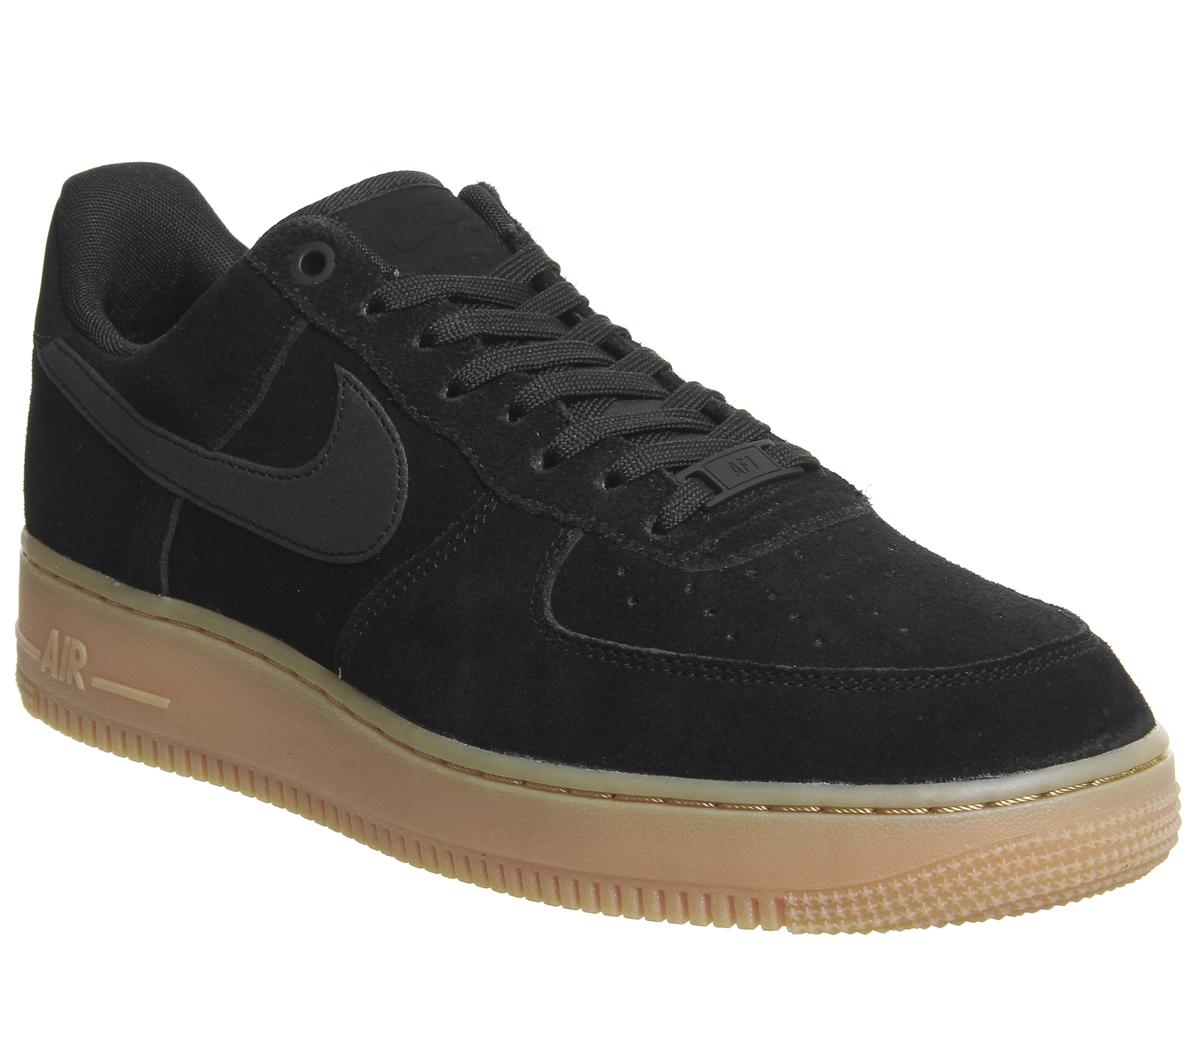 air force one fekete with gum sole 